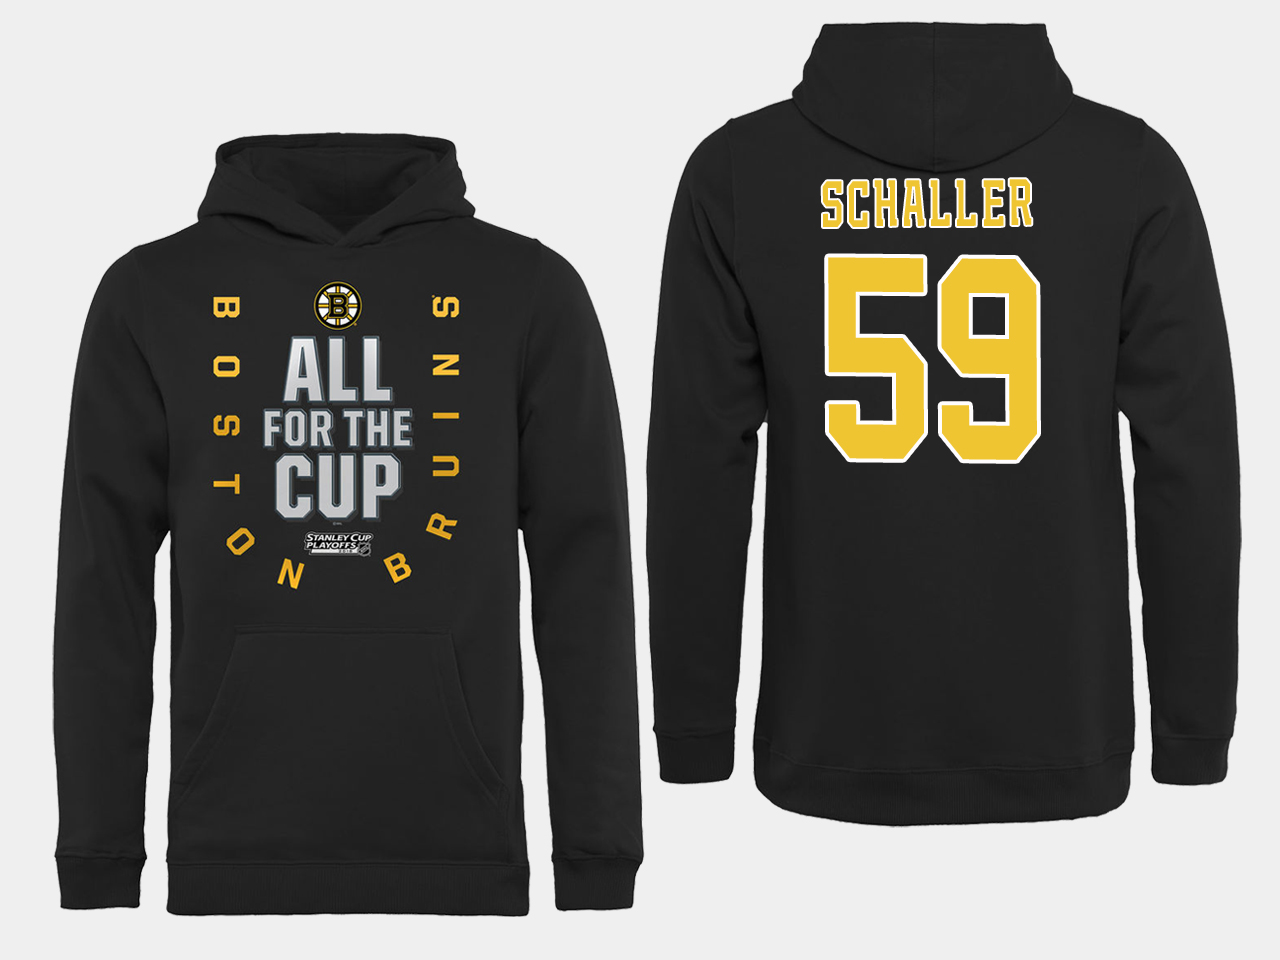 NHL Men Boston Bruins #59 Schaller Black All for the Cup Hoodie->boston bruins->NHL Jersey